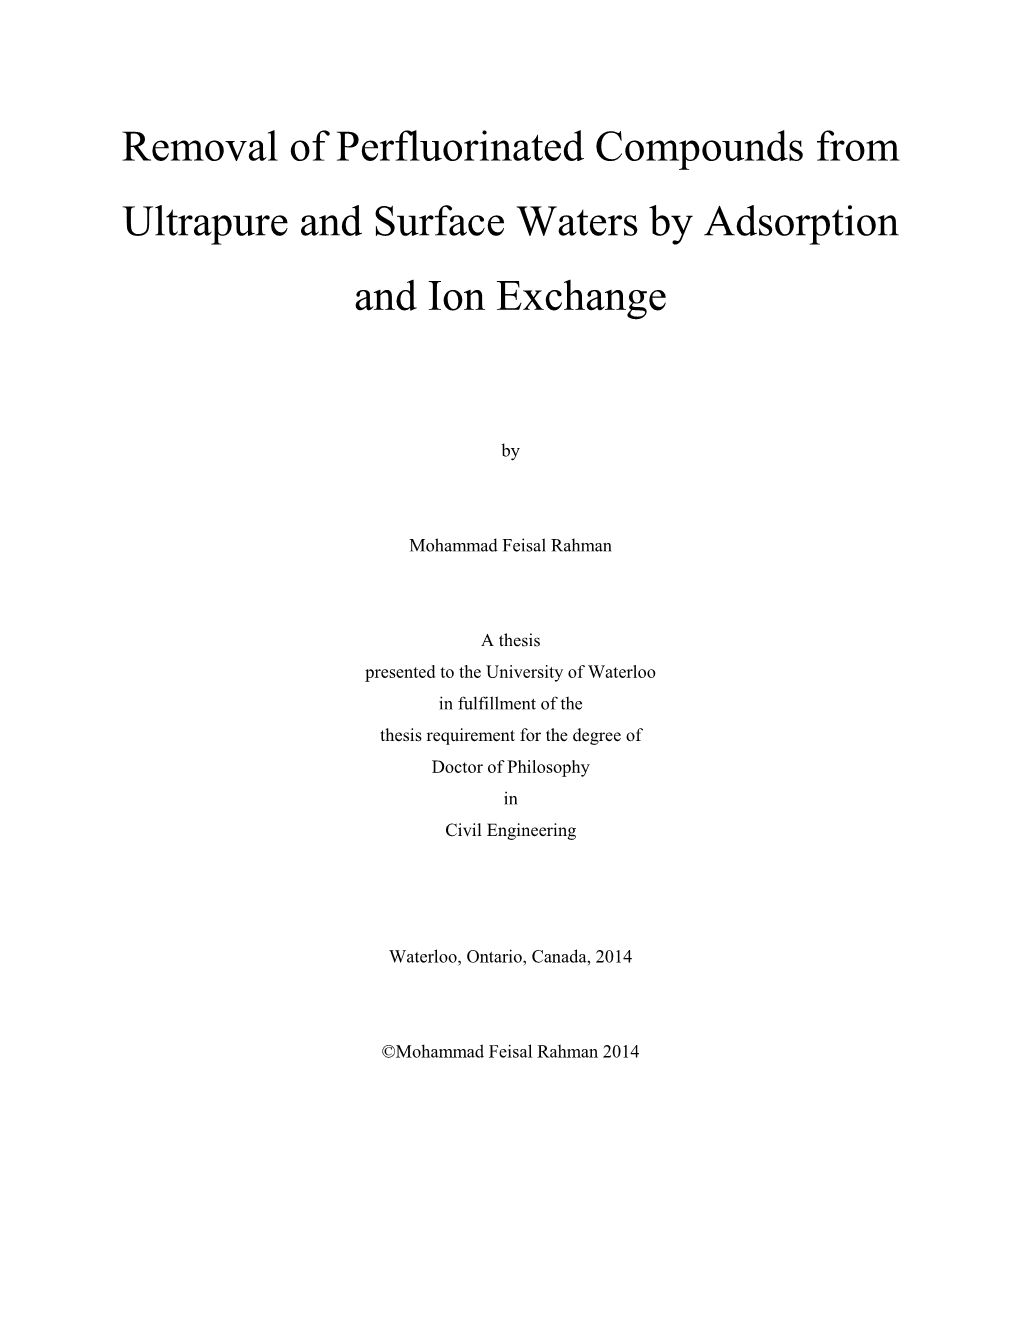 Removal of Perfluorinated Compounds from Ultrapure and Surface Waters by Adsorption and Ion Exchange